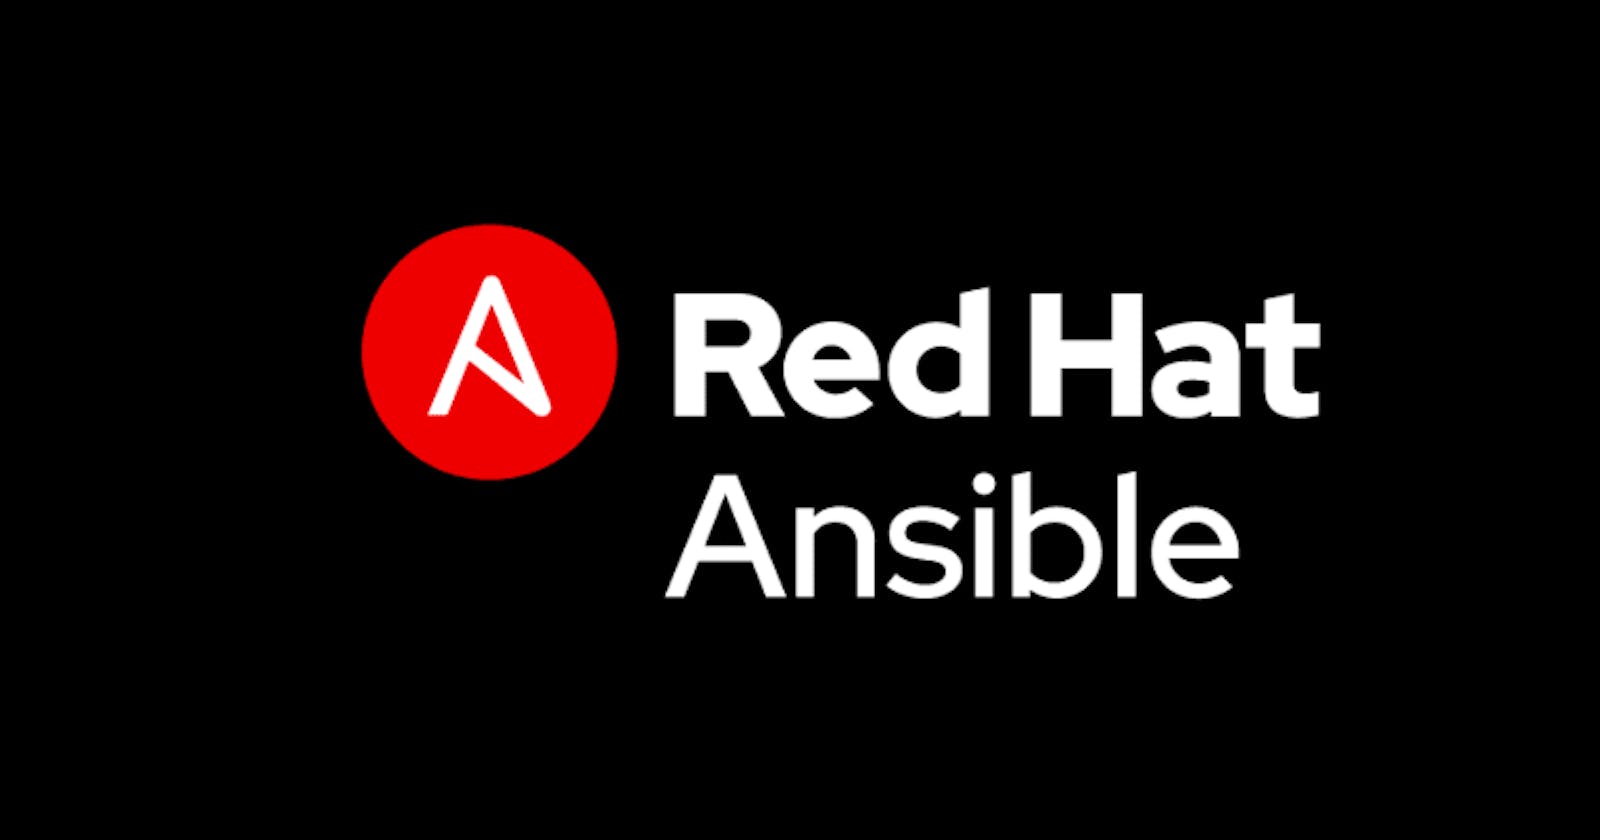 Let's talk about Ansible